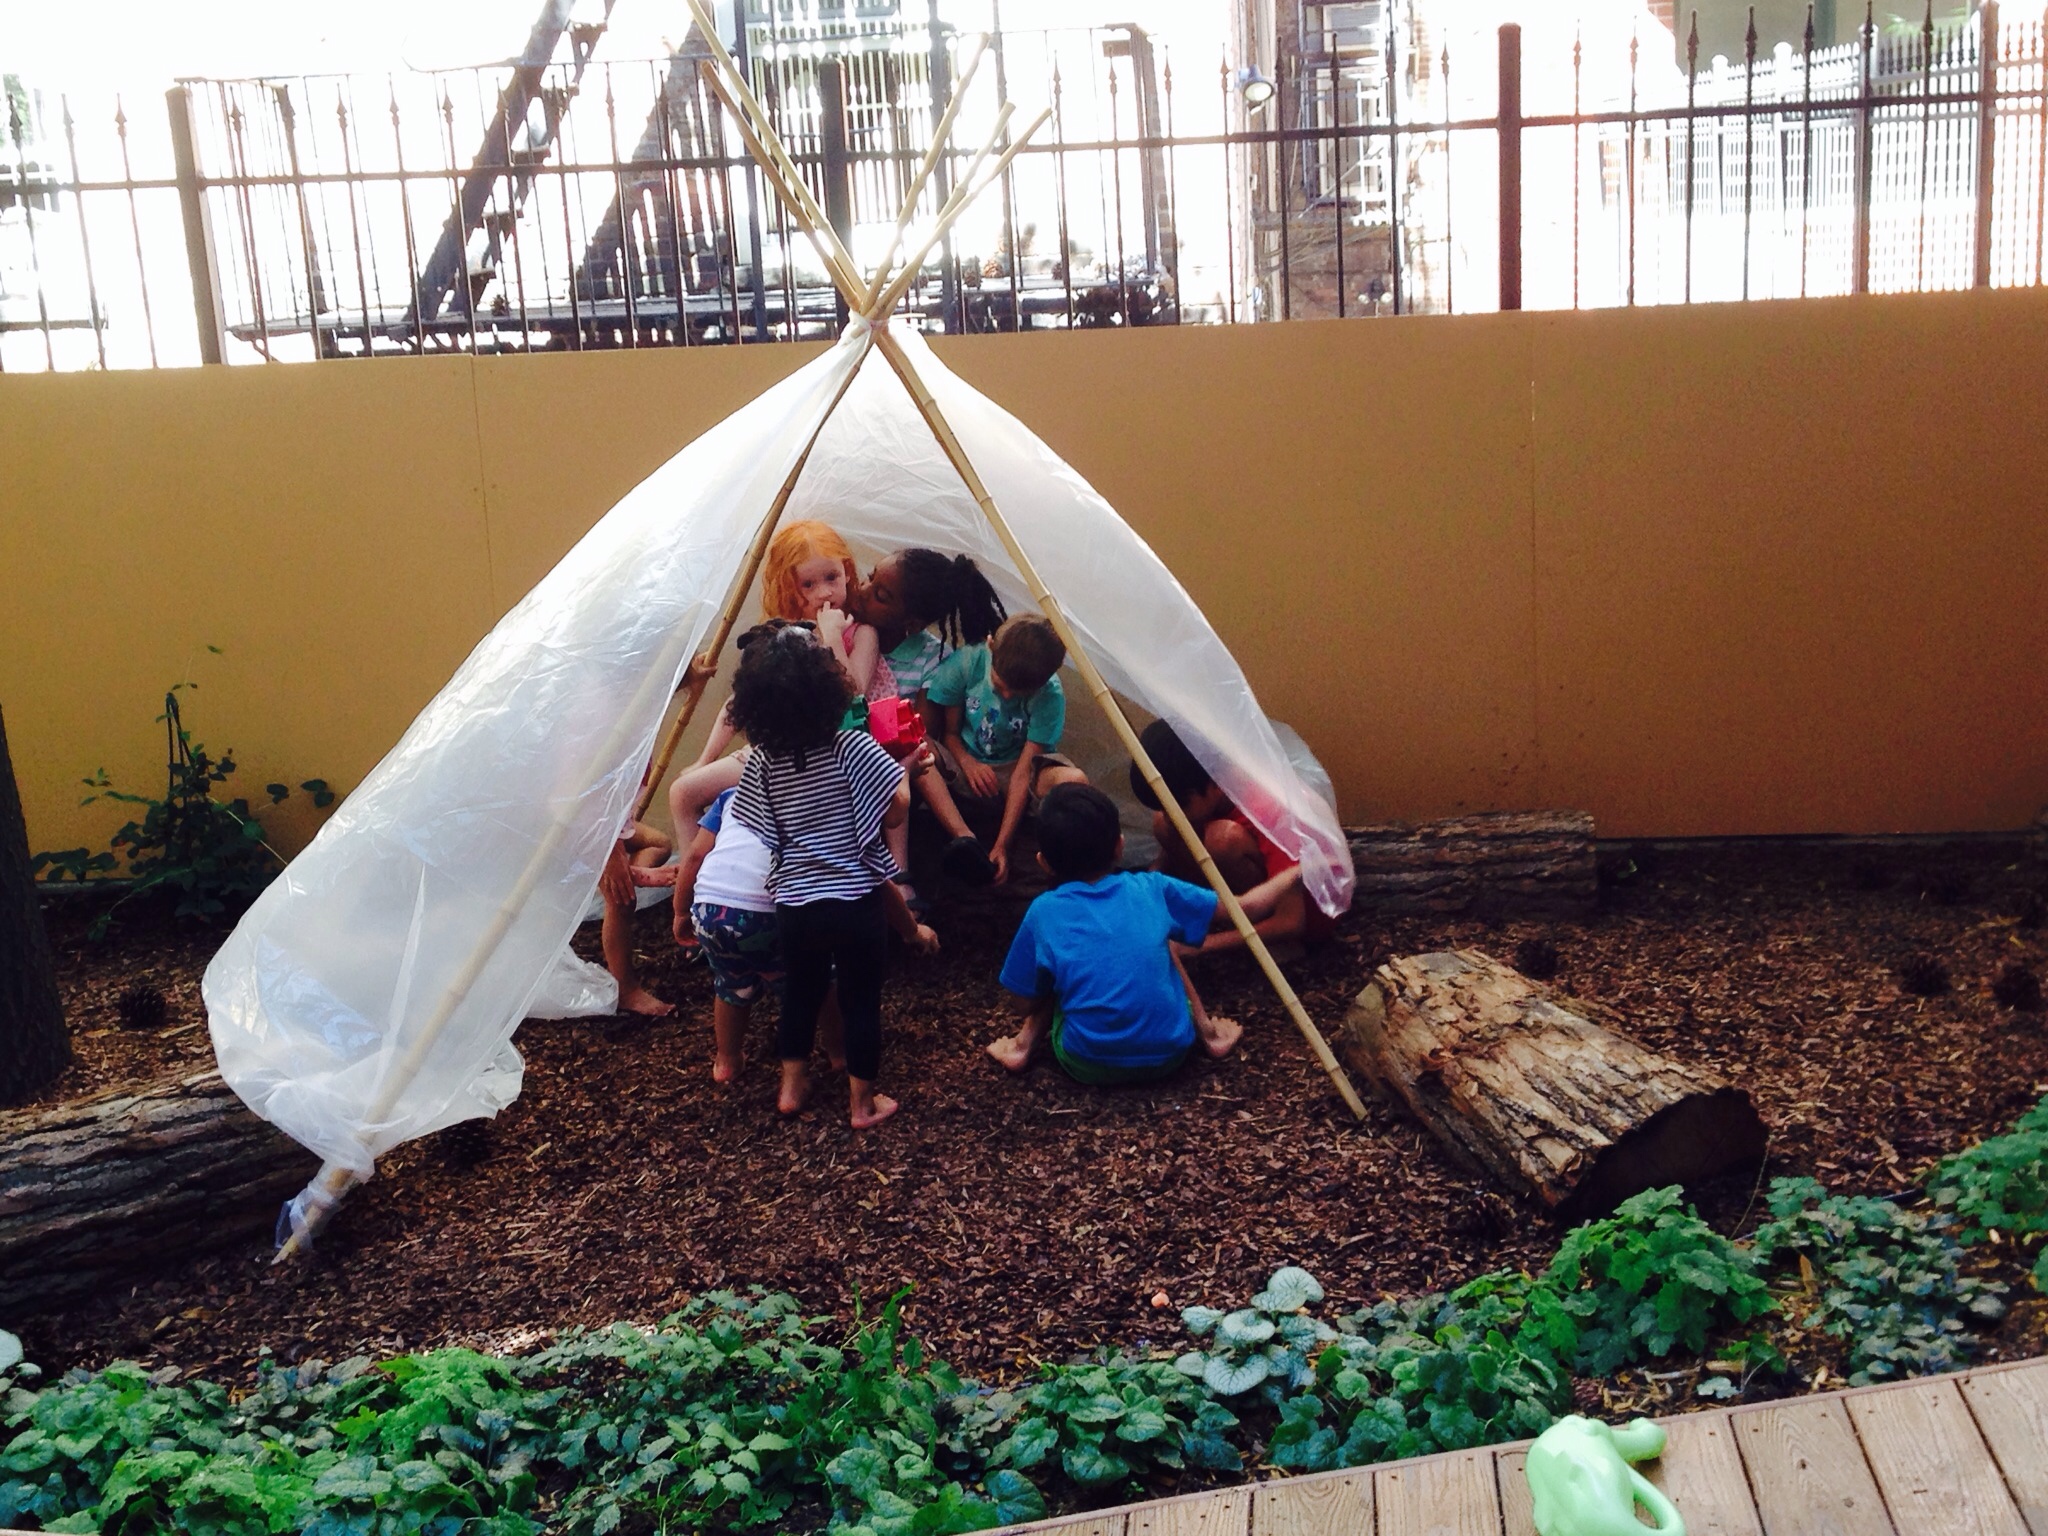 Preschoolers not only learn about the ABC's but also spend time in a tepee at Elements.